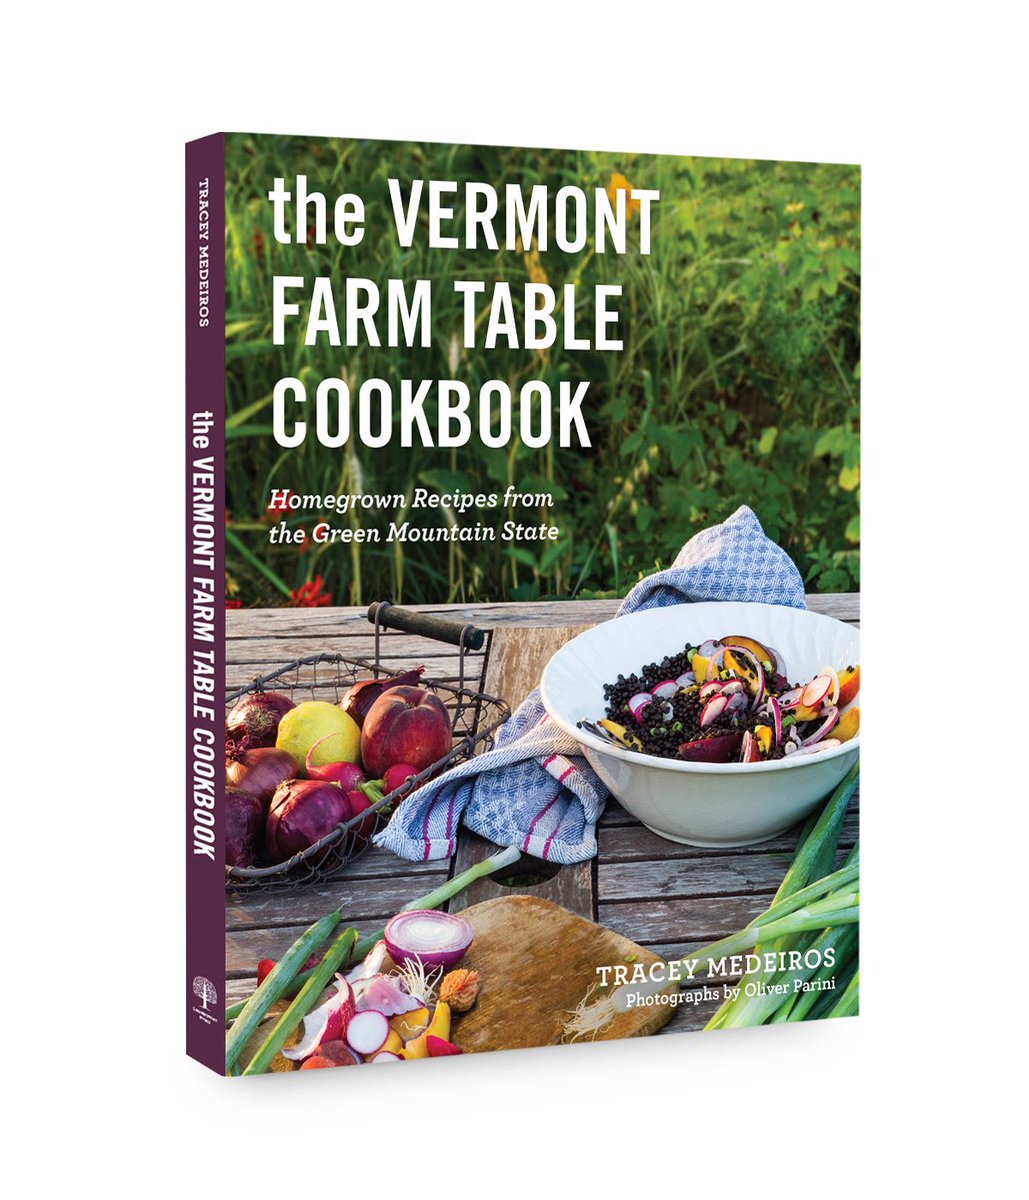 Join us Saturday, July 15 at 1pm as we welcome Tracey Medeiros, author of The Vermont Farm Table Cookbook: Homegrown Recipes from the Green Mountain State. A sampling of recipes from the book will be provided by chef Sigal Rocklin. #northshirebookstore #traceymedeiros #cookbook